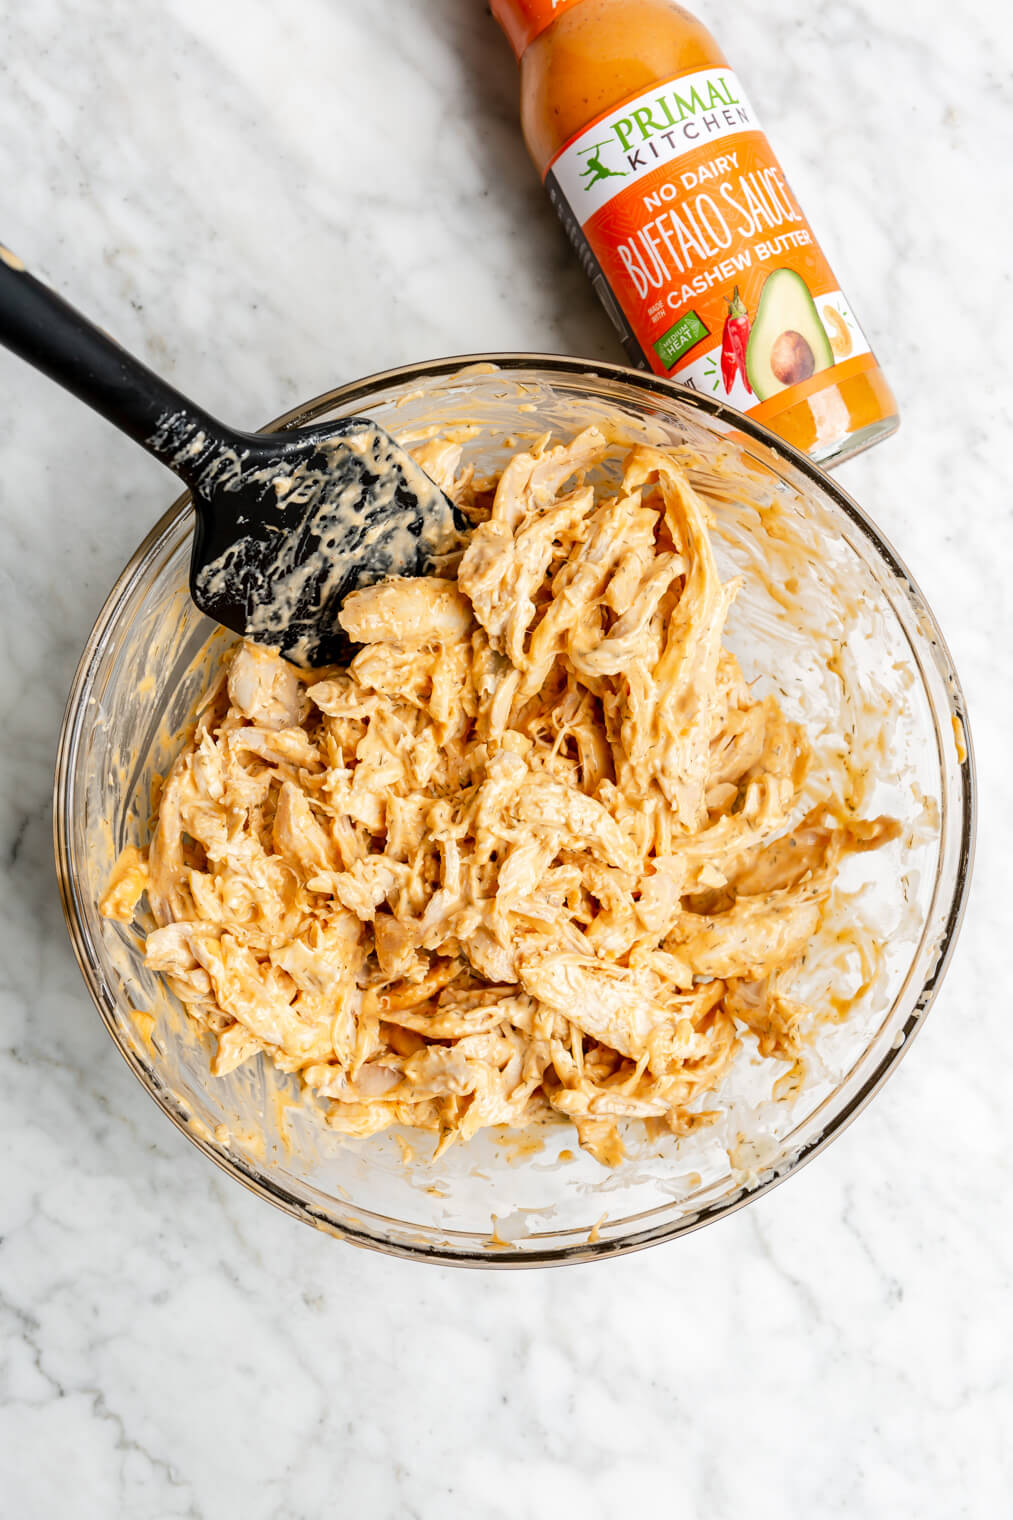 Shredded chicken in a buffalo and ranch mixture in a glass bowl on a gray and white surface.